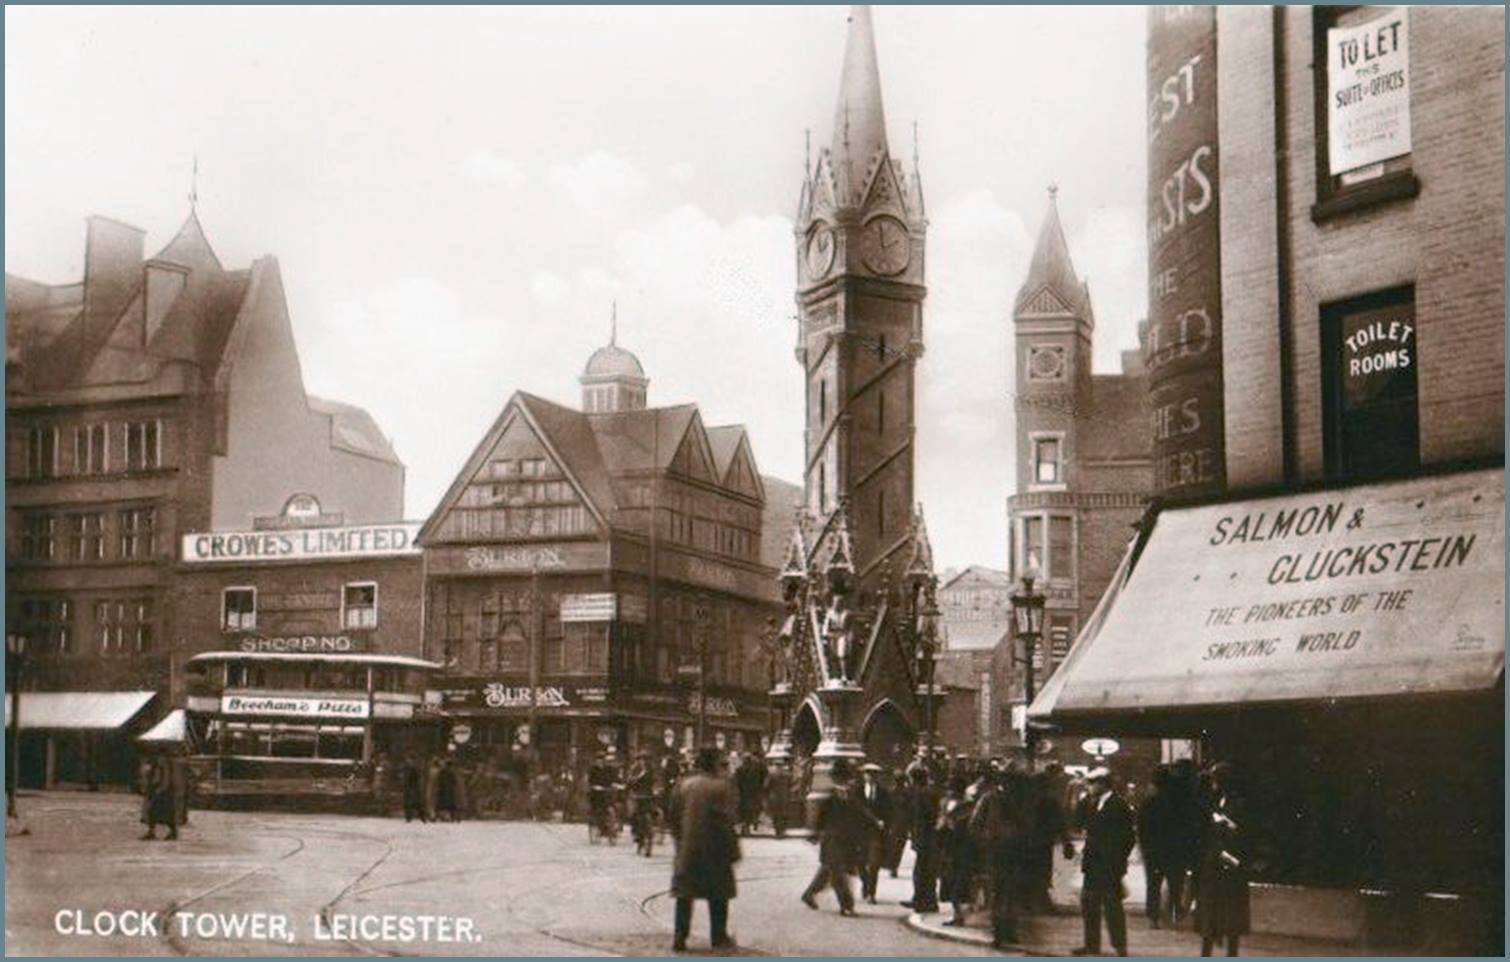 Photo of Leicester's clock tower from the late 1800s.